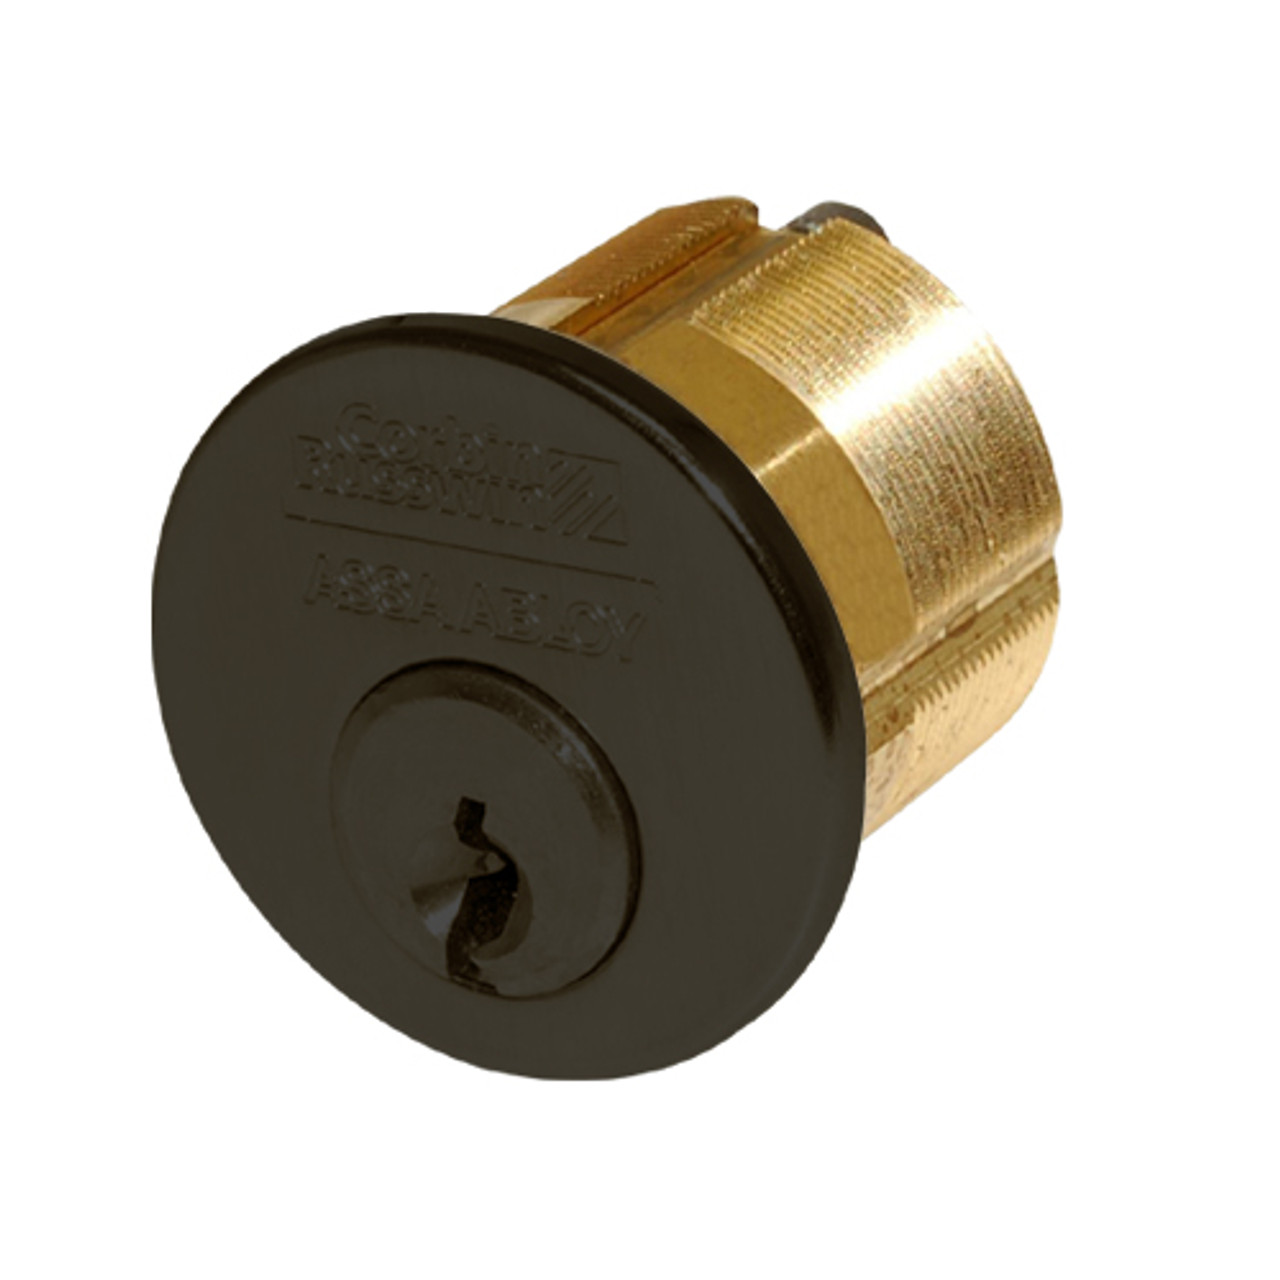 CR1000-138-A06-6-59A1-613 Corbin Conventional Mortise Cylinder for Mortise Lock and DL3000 Deadlocks with Schlage L9000 Cam in Oil Rubbed Bronze Finish